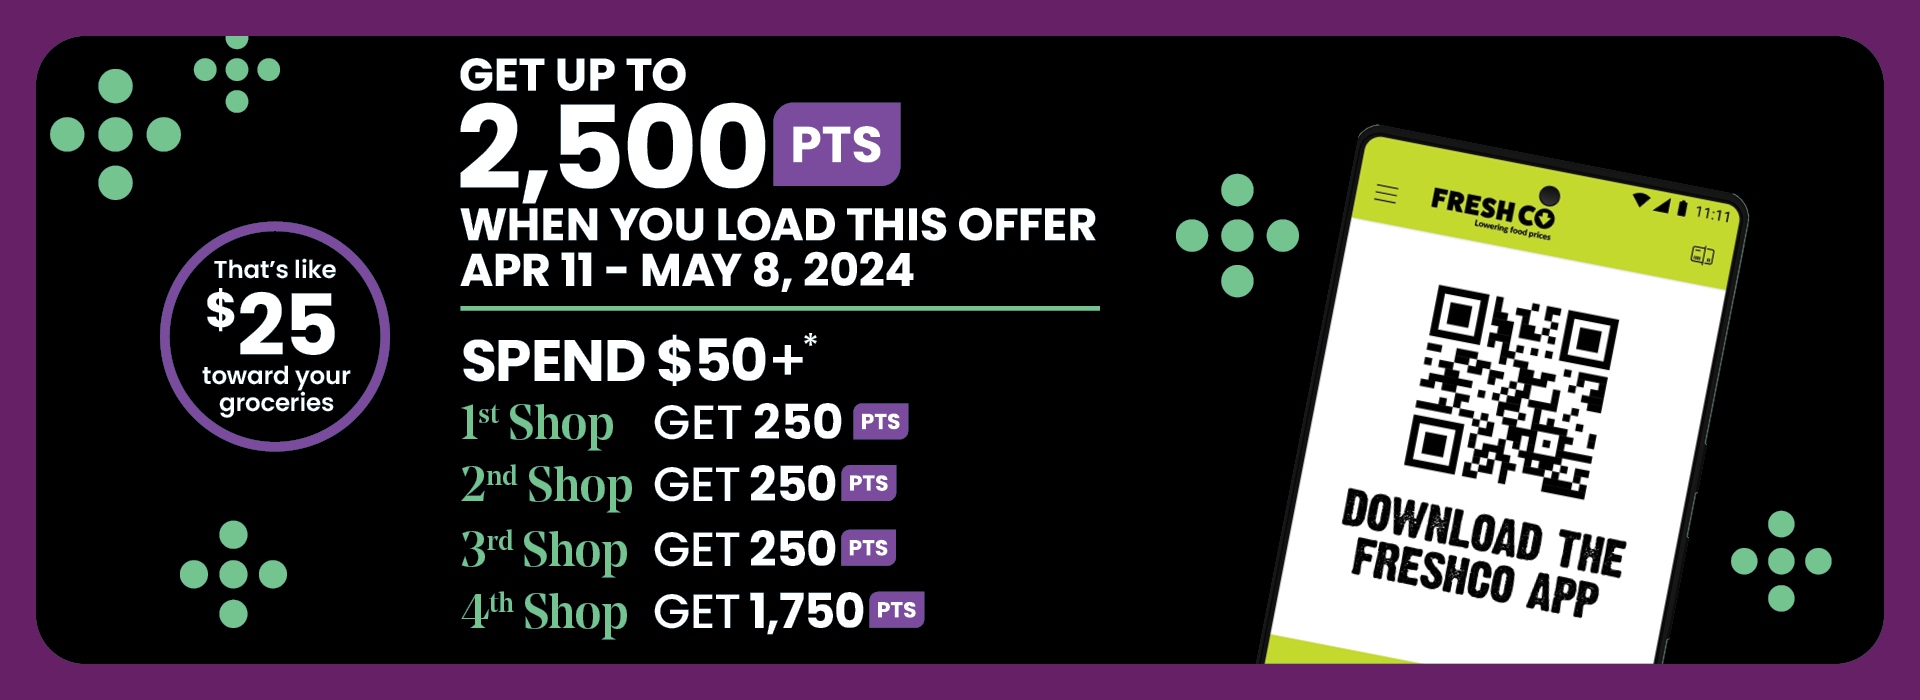 The following image contains the text: "Download the Feshco app and get up to 2,500 PTS when you load this offer Apr 11-May 8, 2024. Spend $50+*. 1st Shop Get 250 PTS, 2nd Shop Get 250 PTS, 3rd Shop Get 250 PTS, 4th Shop Get 1,750 PTS. That's like $25 toward your groceries."